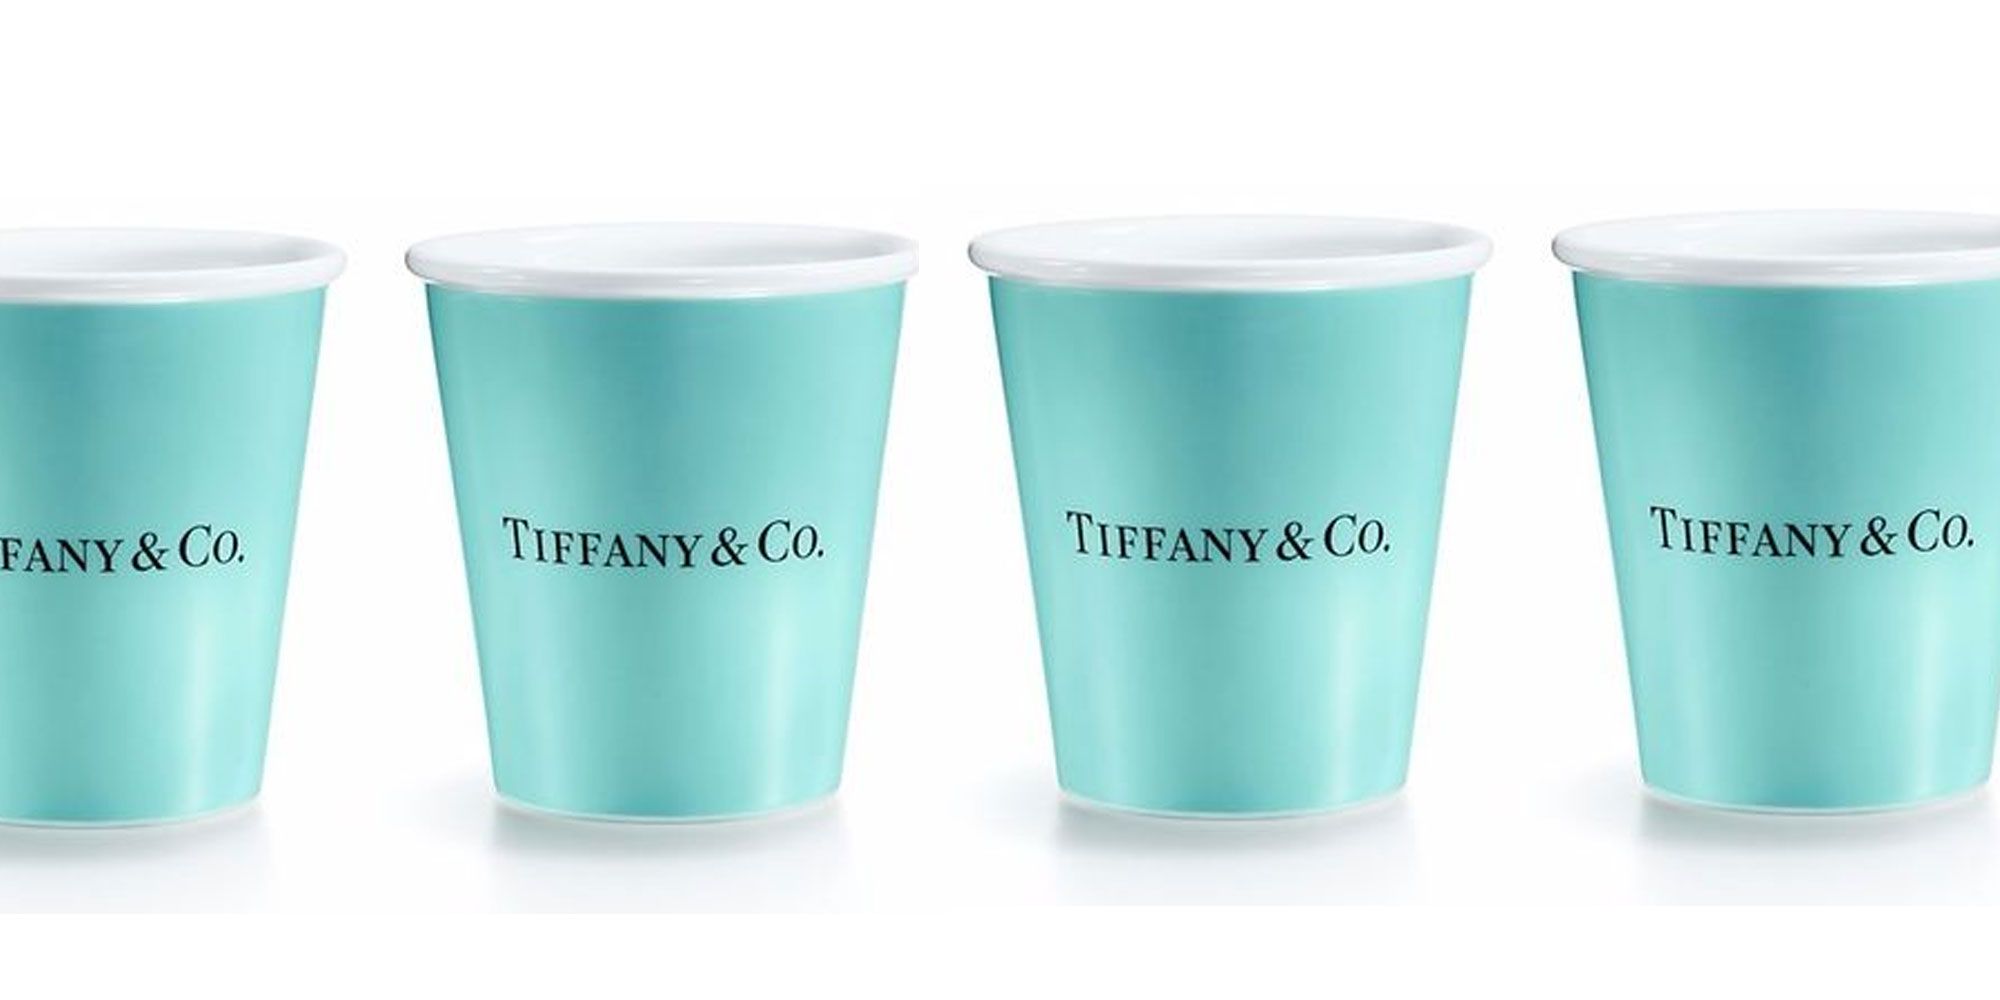 14 Best Items From Tiffany & Co.'s New Home and Accessories Line - Luxury  Everyday Objects